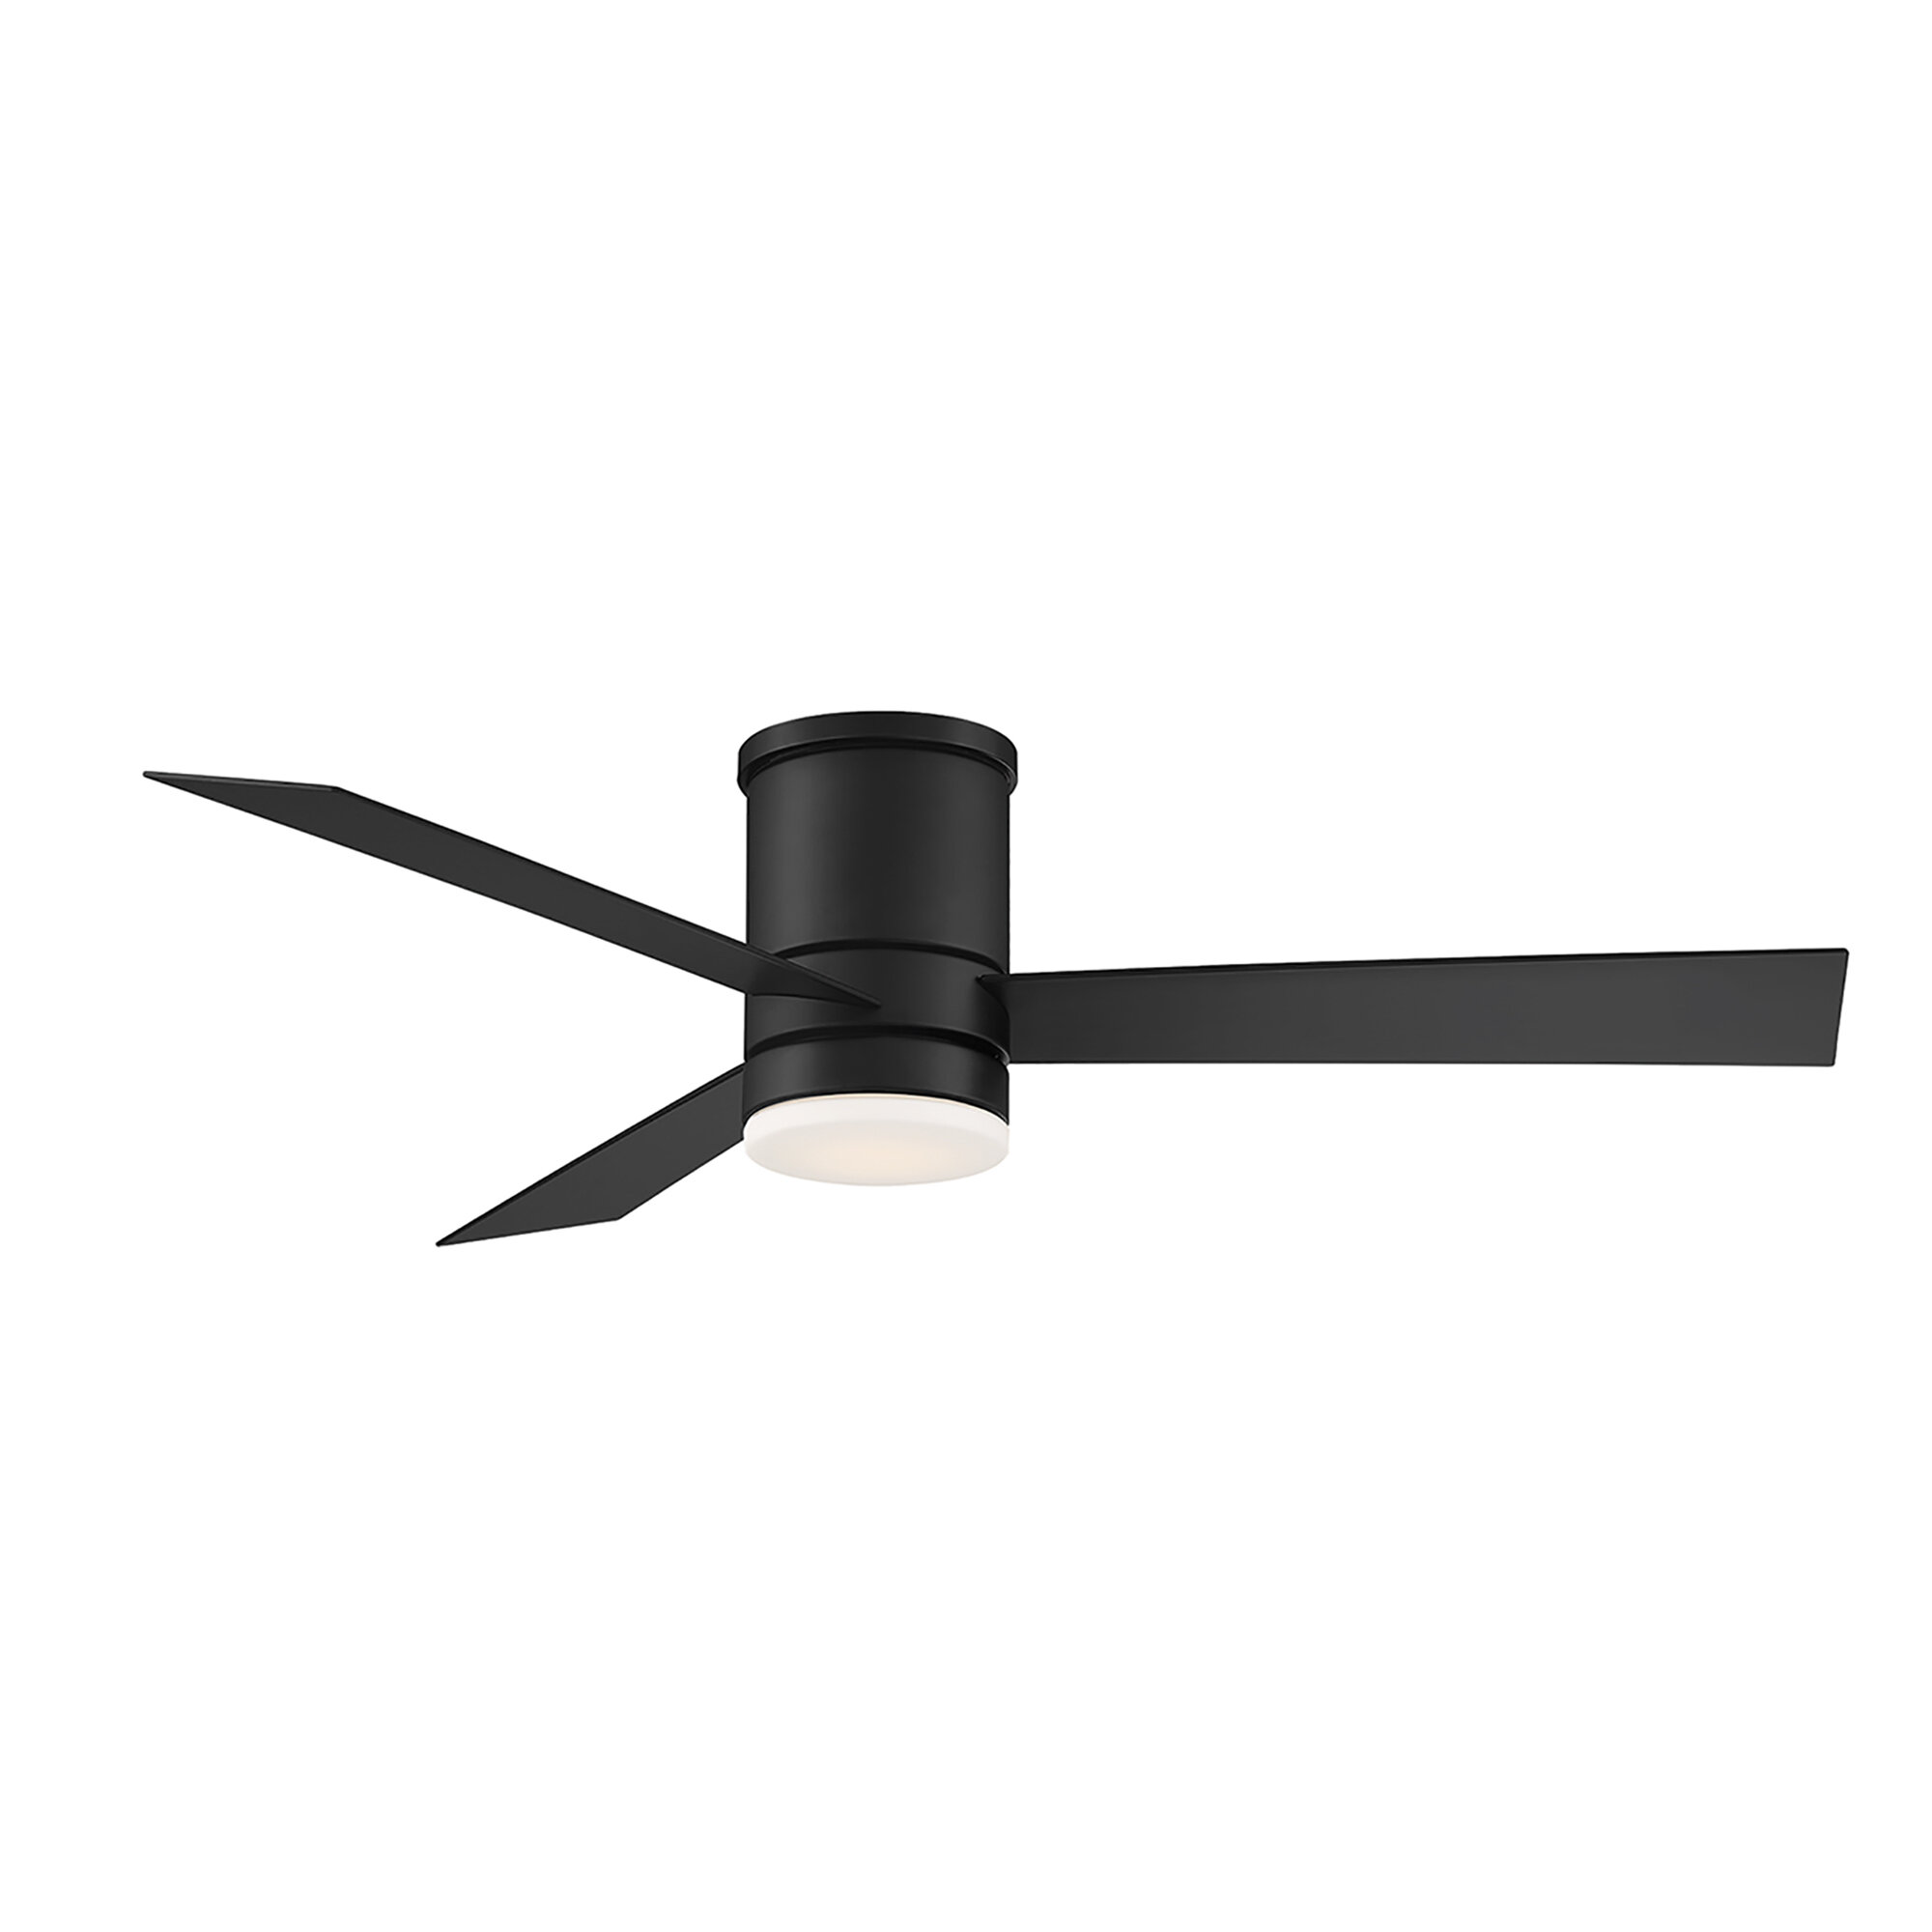 Modern Forms 52 Axis 3 Blade Outdoor Led Smart Flush Mount Ceiling Fan With Wall Control And Light Kit Included Wayfair